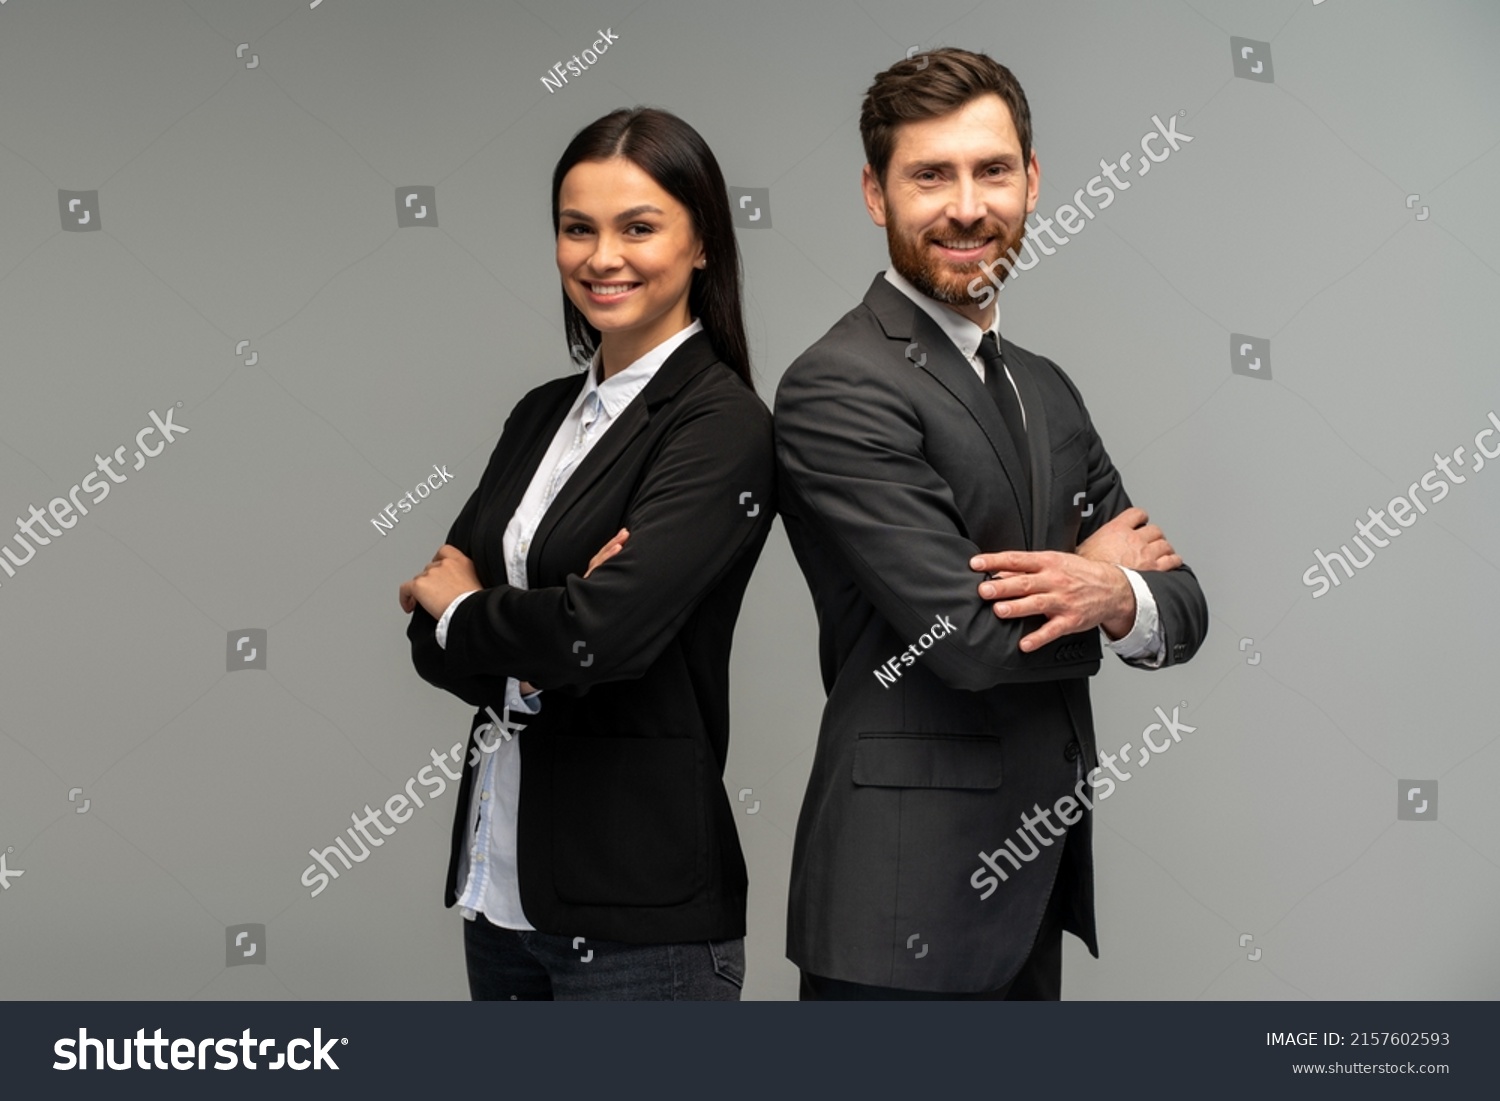 Concept of partnership in business. Young man and woman standing back-to-back with crossed hands against grey background  #2157602593